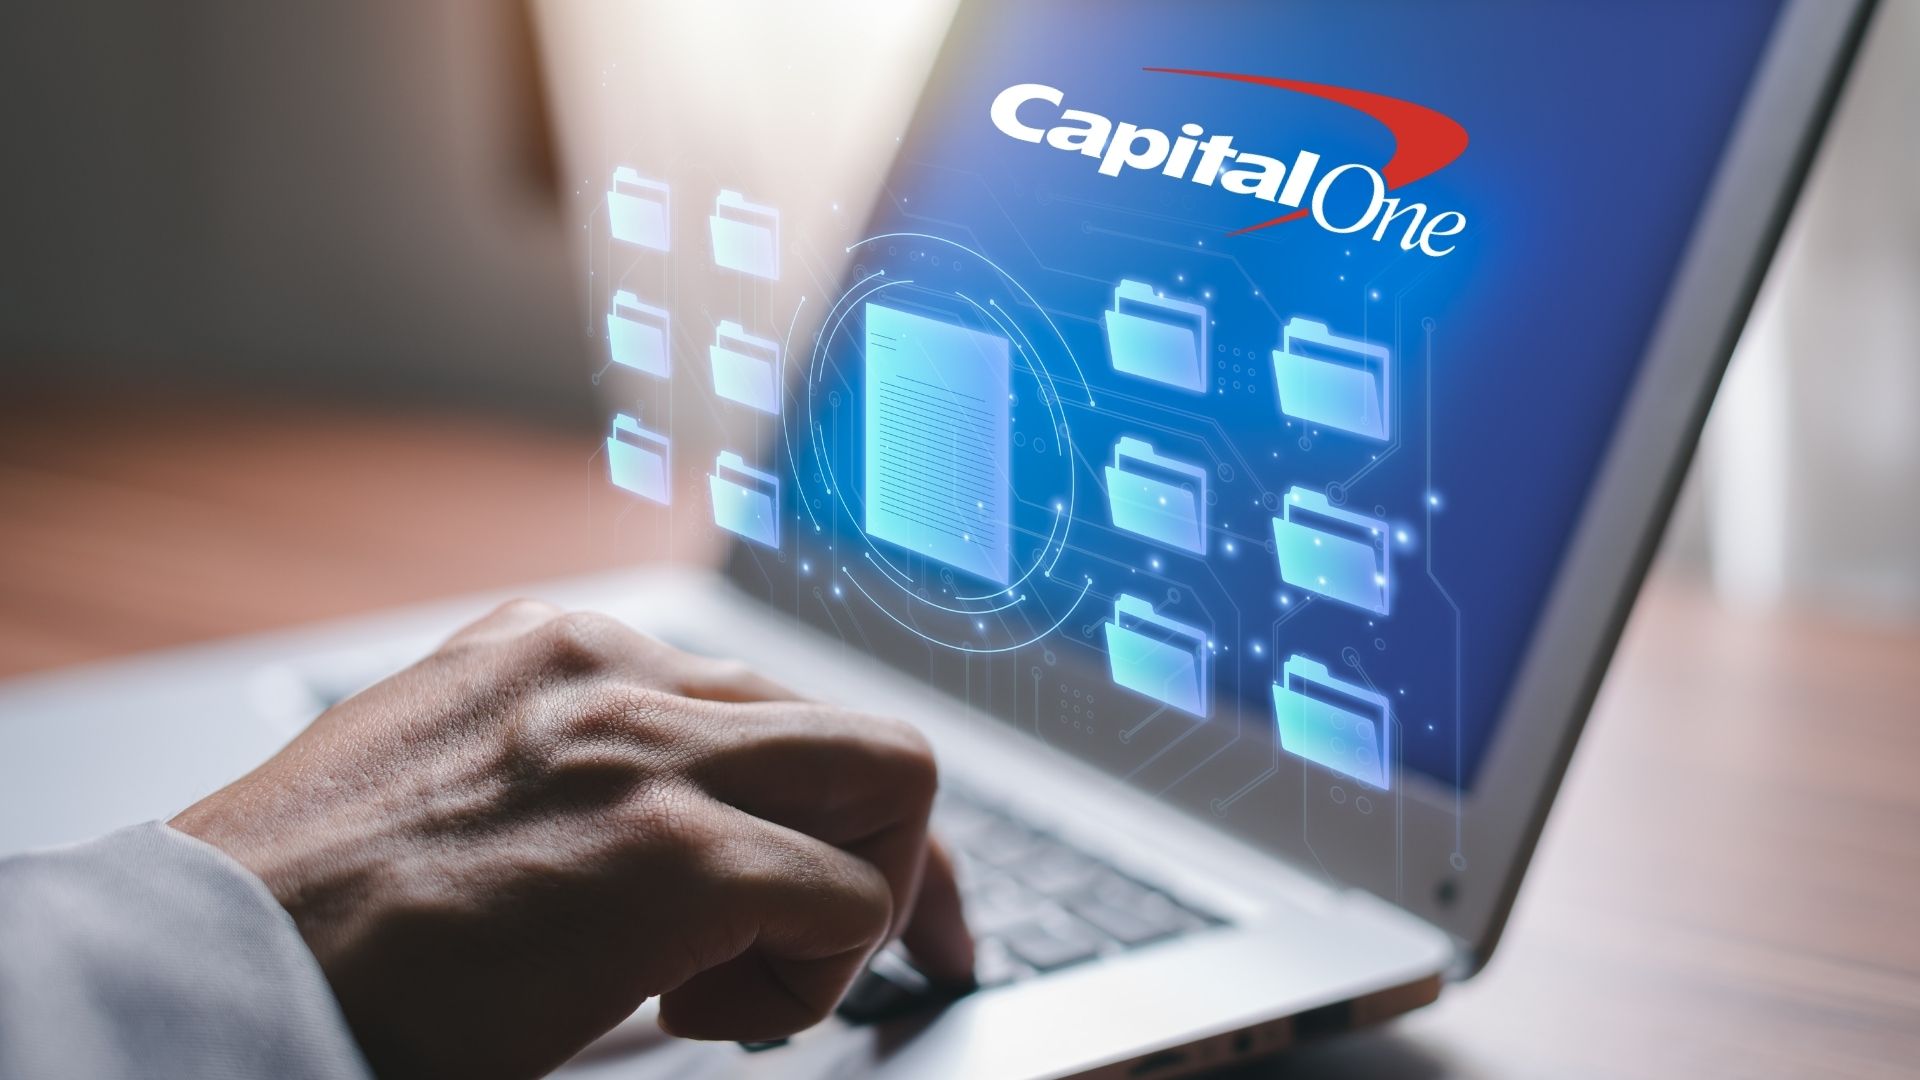 CAPITAL-ONE-LAUNCHES-ENTERPRISE-B2B-SOFTWARE-BUSINESS.